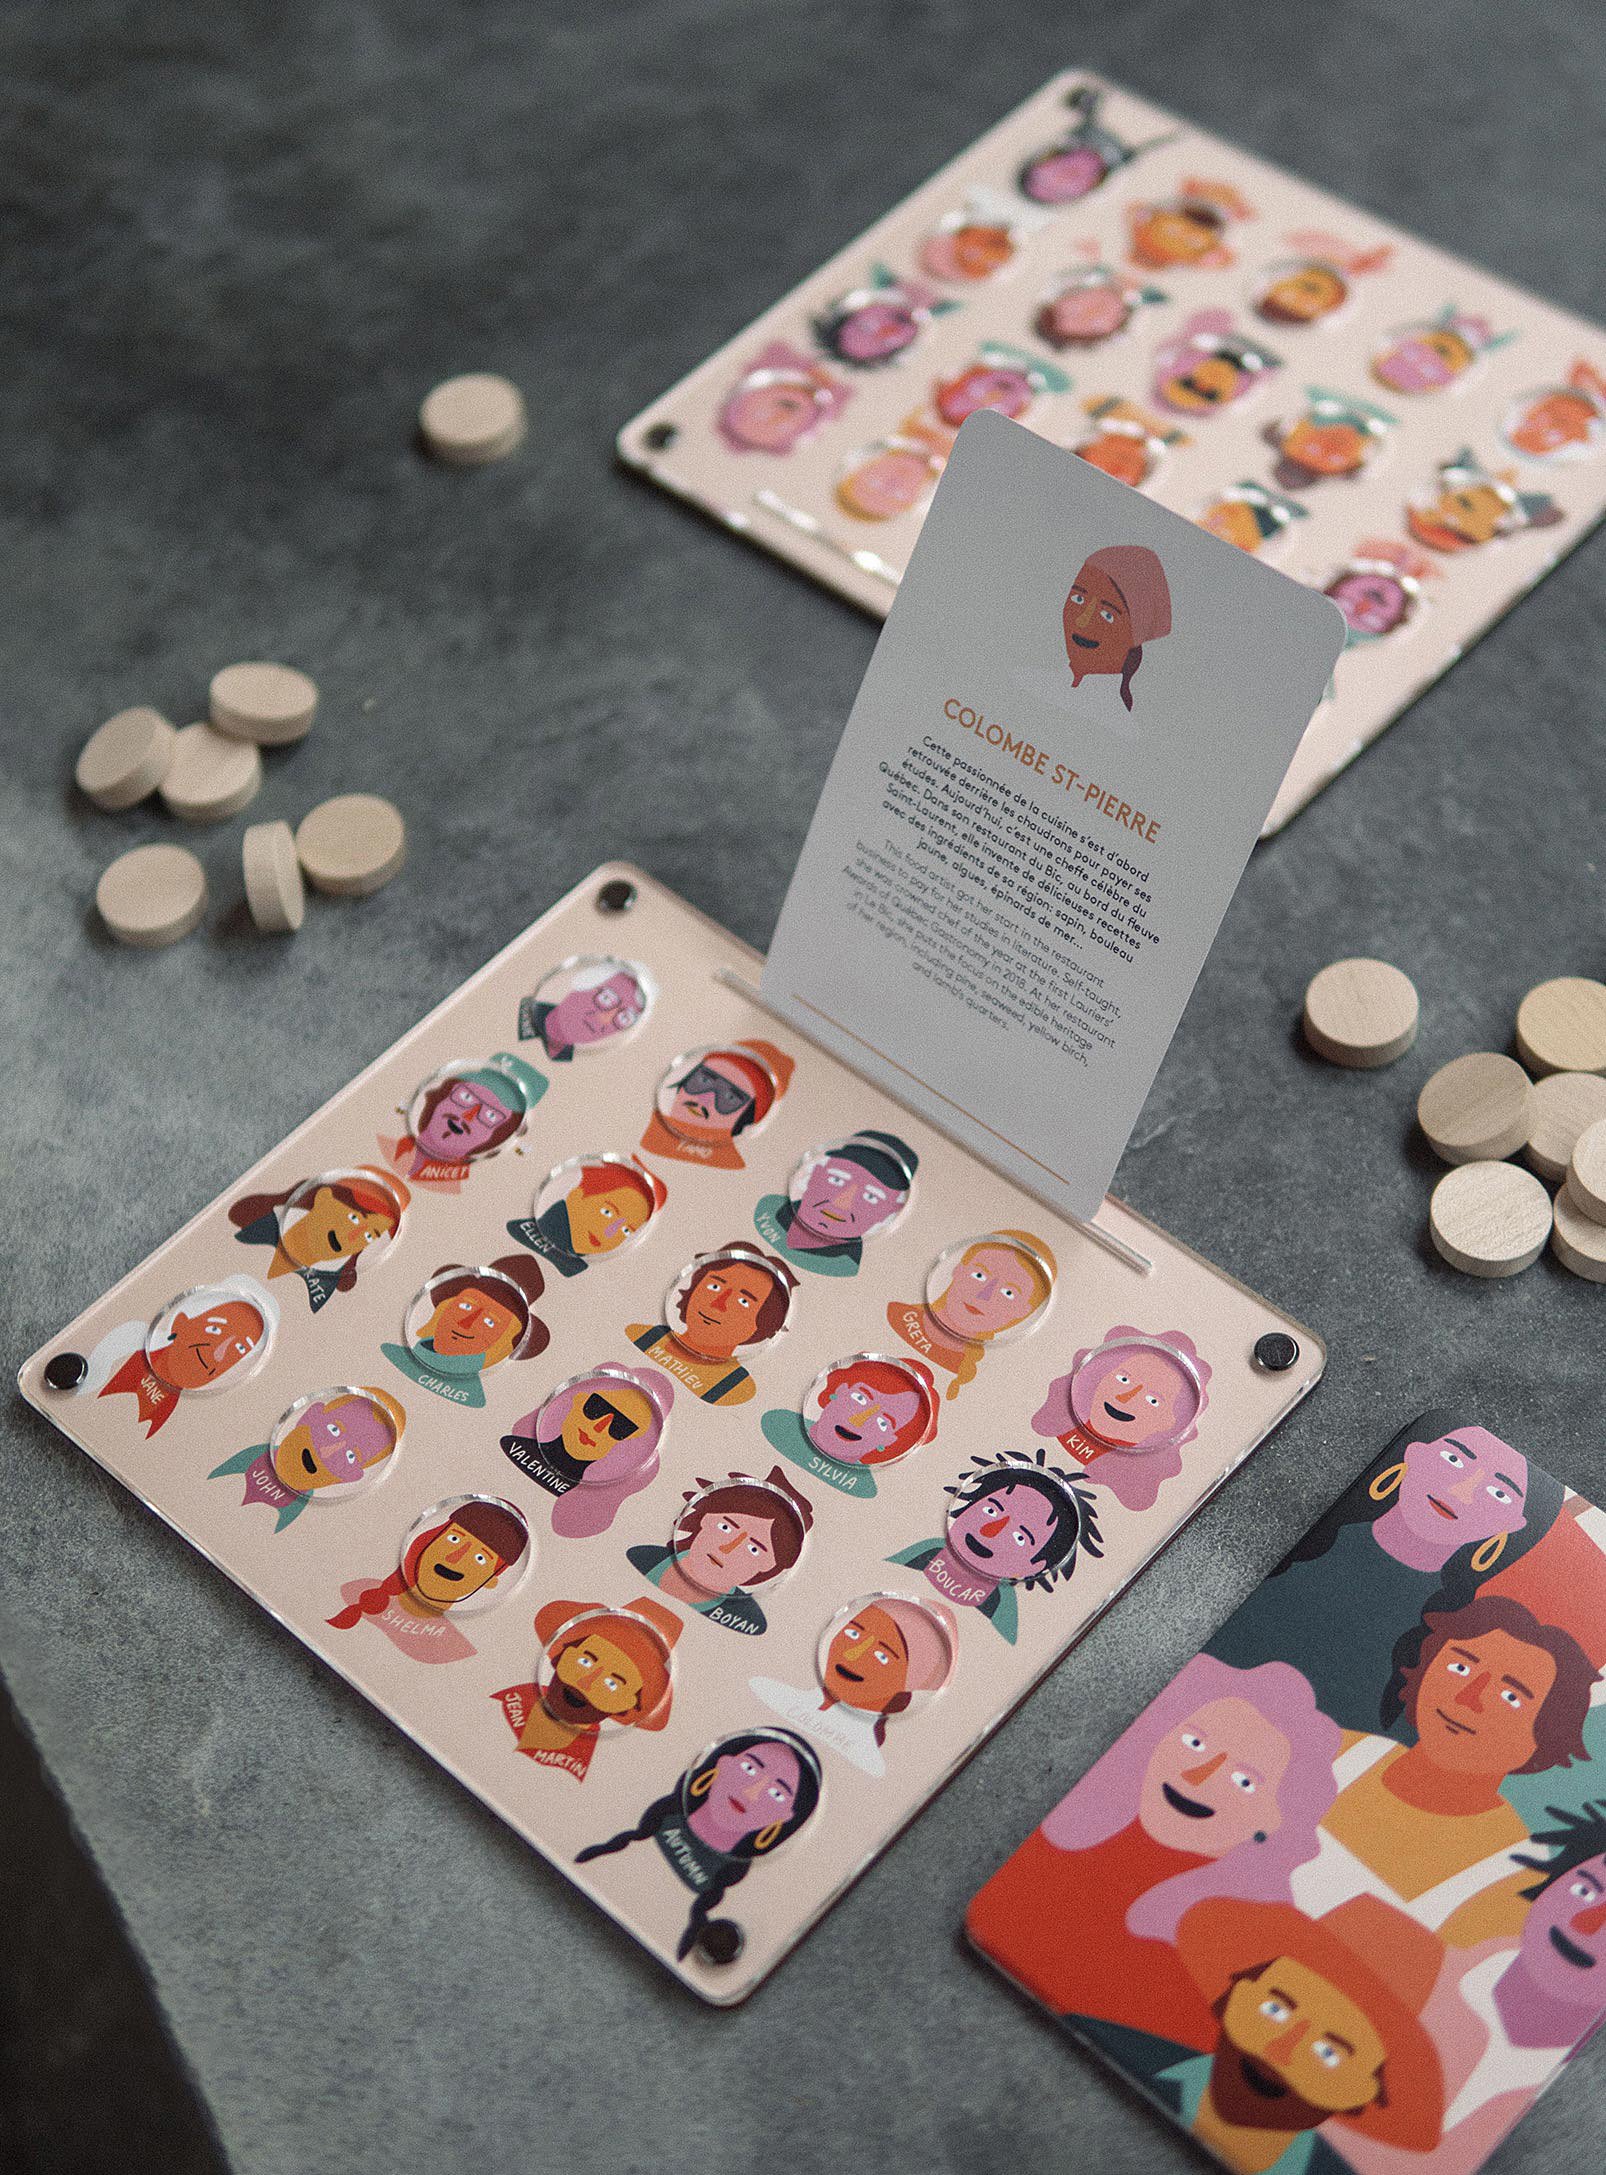 A board with illustrations of twenty faces painted on them